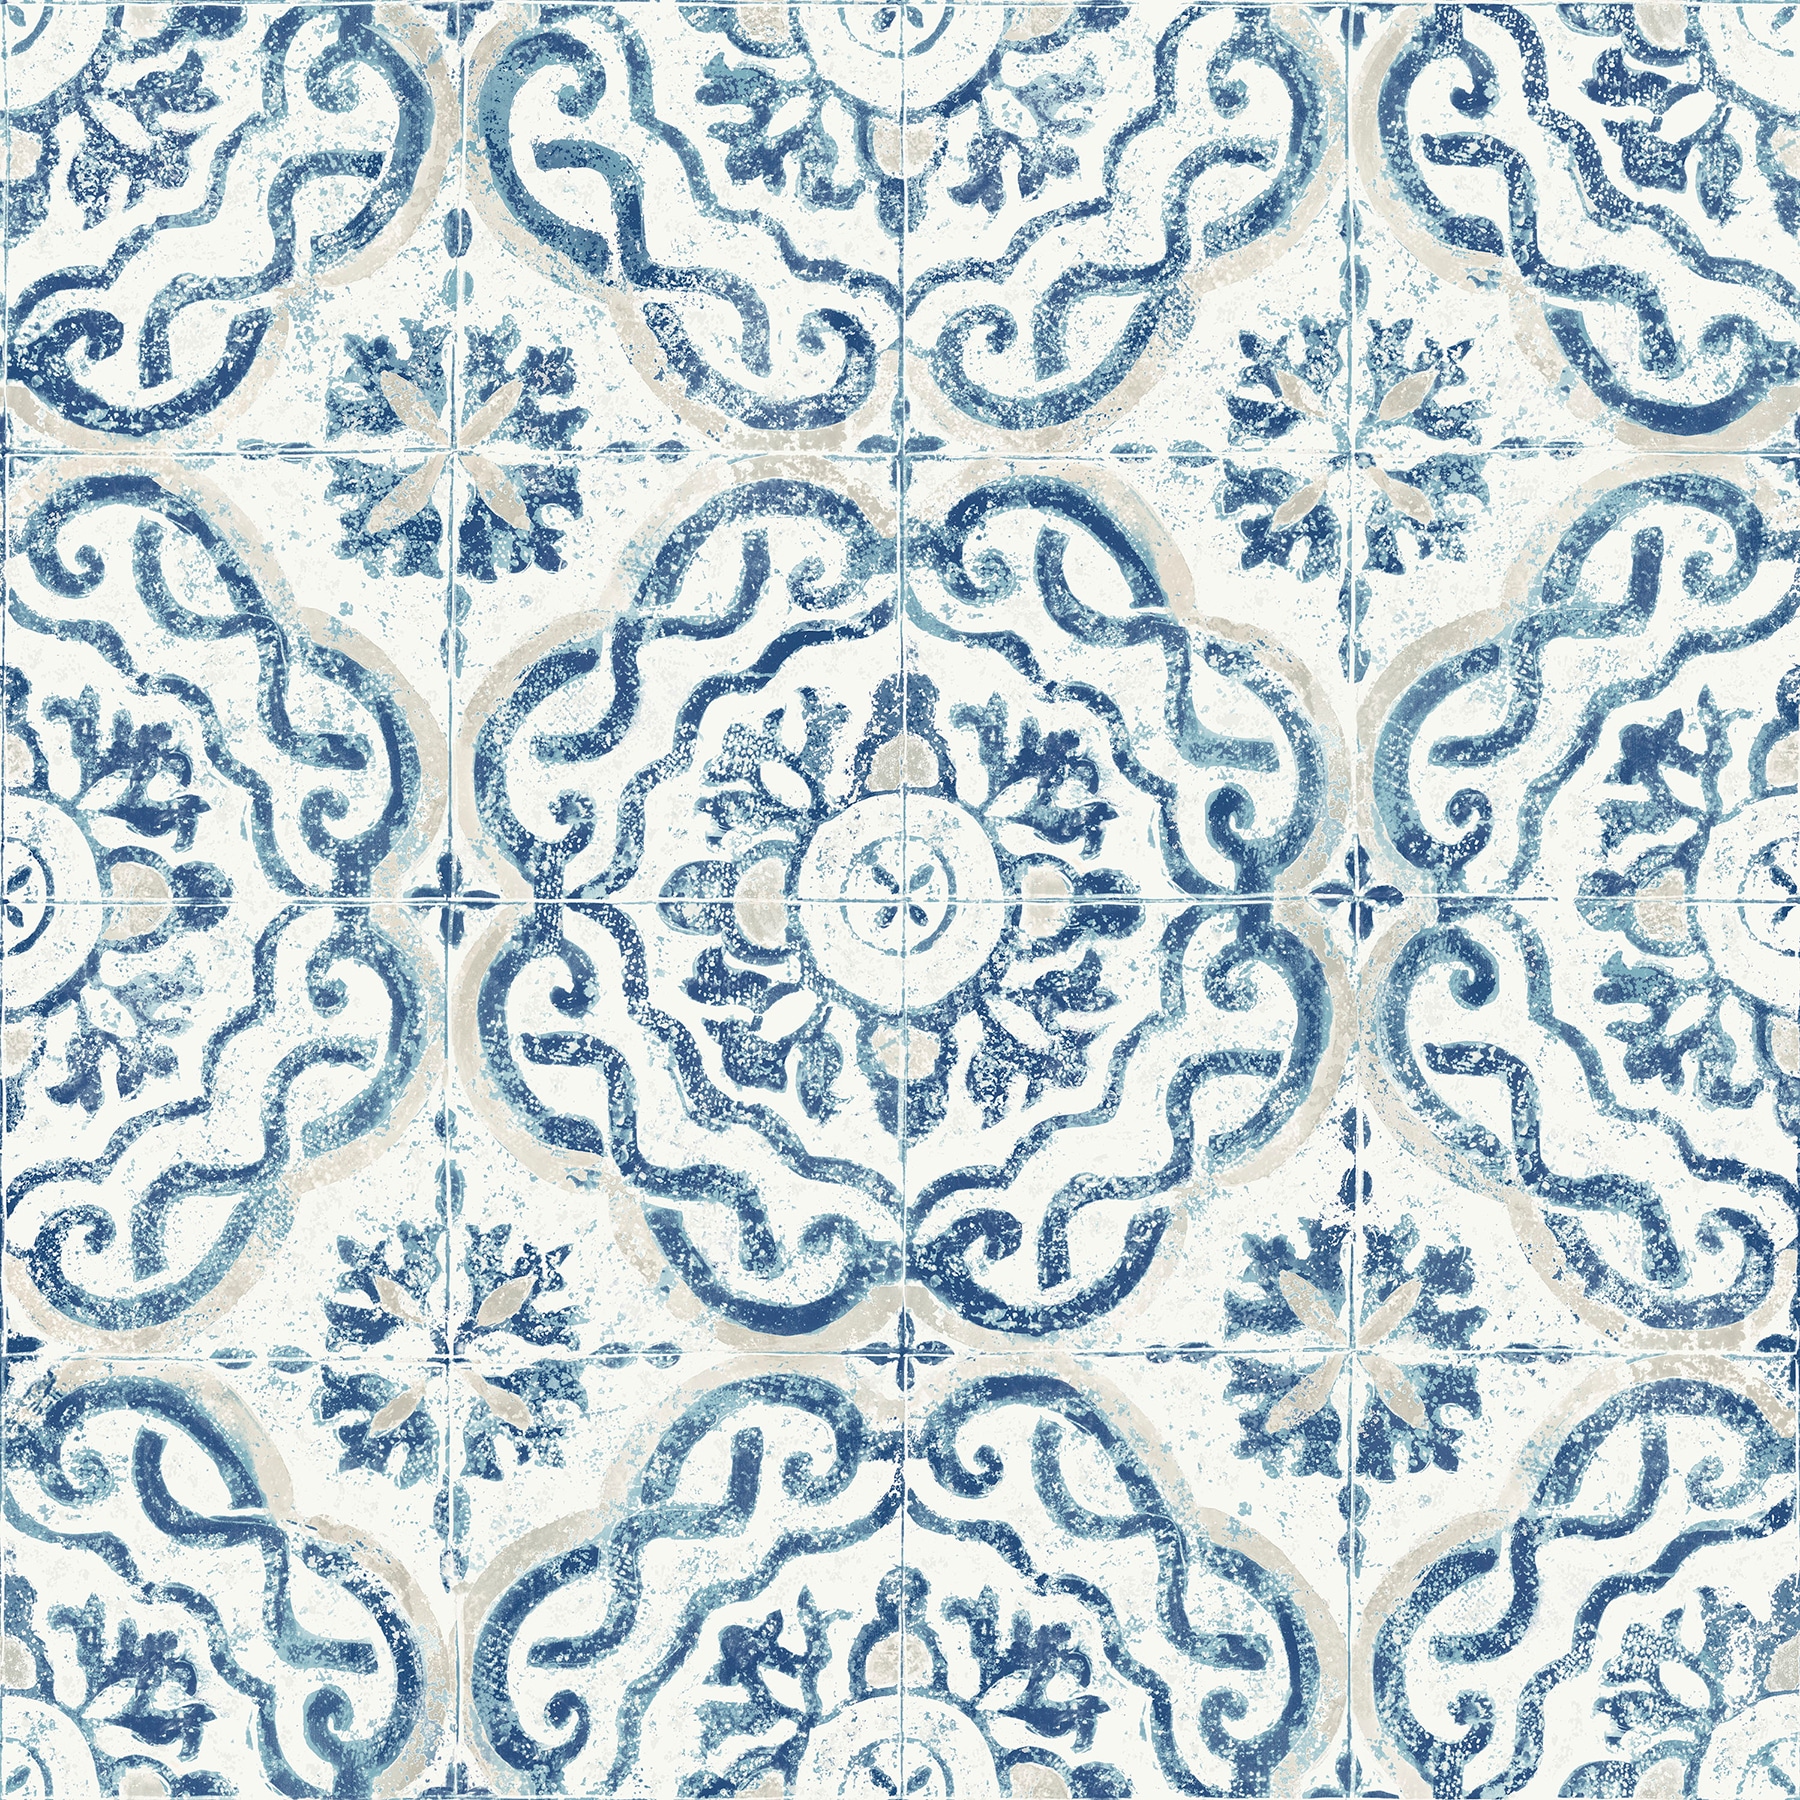 H4S Mexican Talavera 7.8 Inches by 16.4 Feet Removable Peel and Stick PVC Wall Flooring Covering Decorative Backsplash Tile Stickers Decals Wall Paper for Bathroom Kitchen Art Home Decor Pattern 2 H4STS002